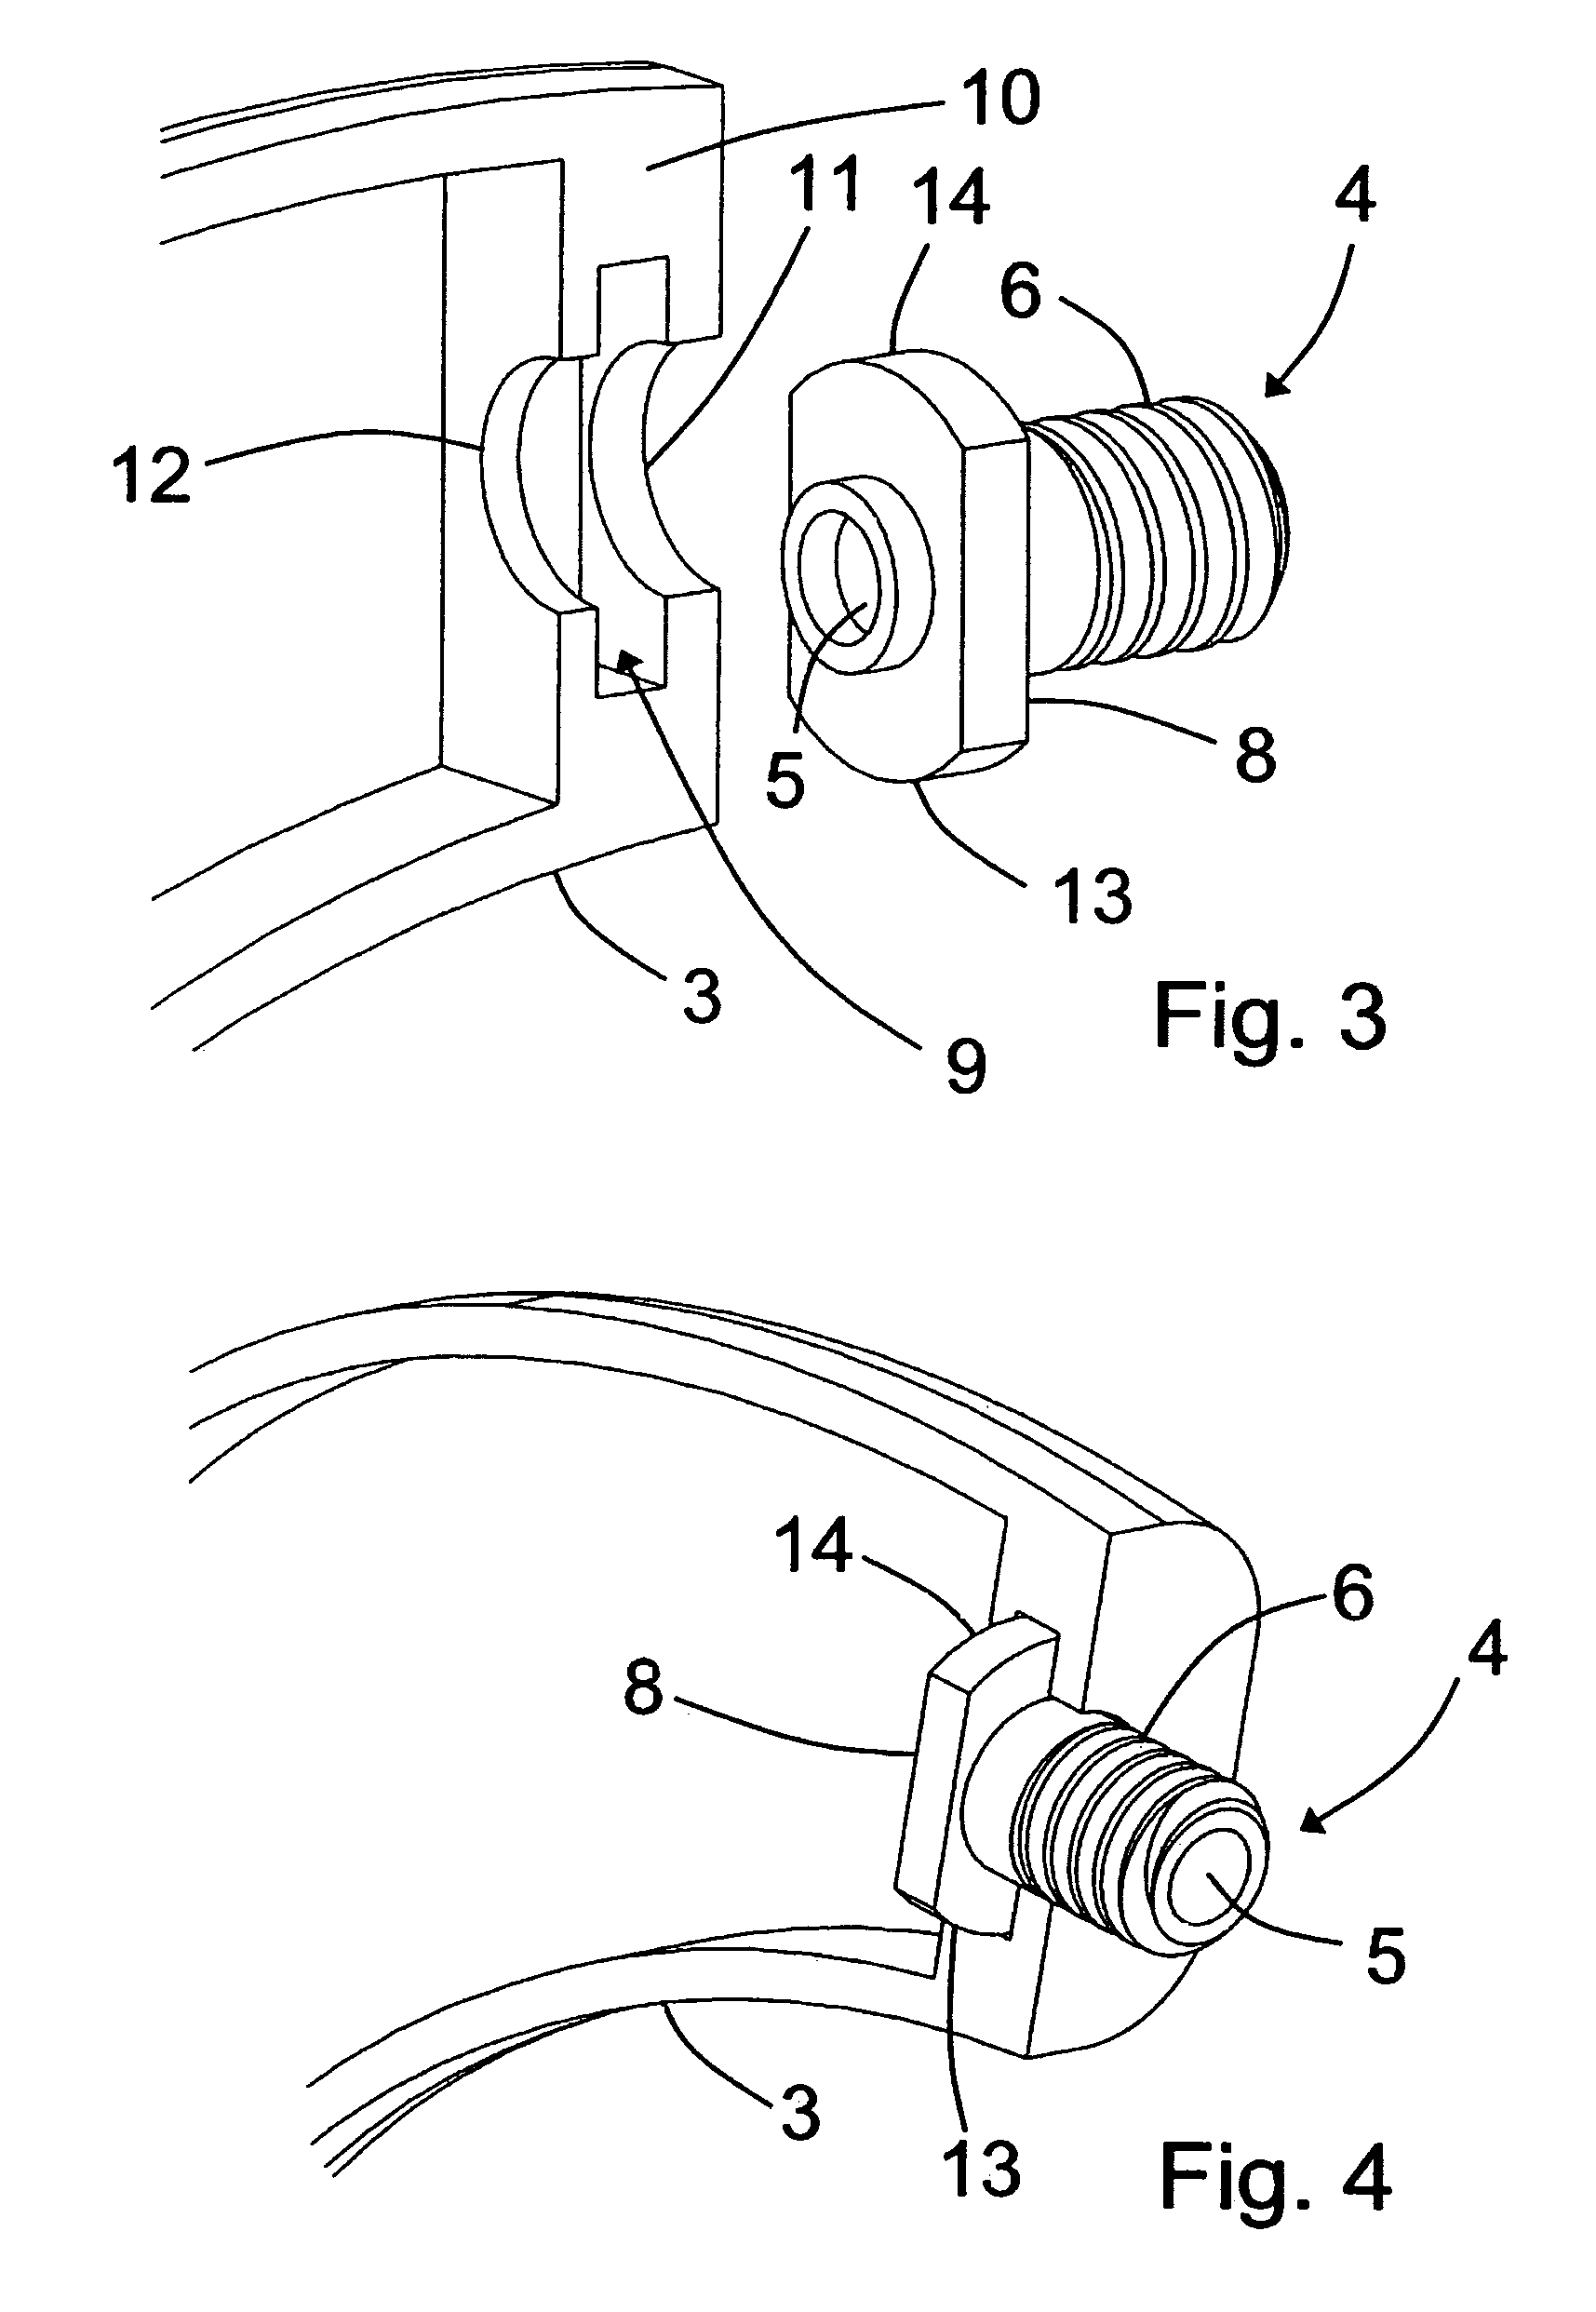 Interchangeable attachment means for attaching a conductor to a hearing aid